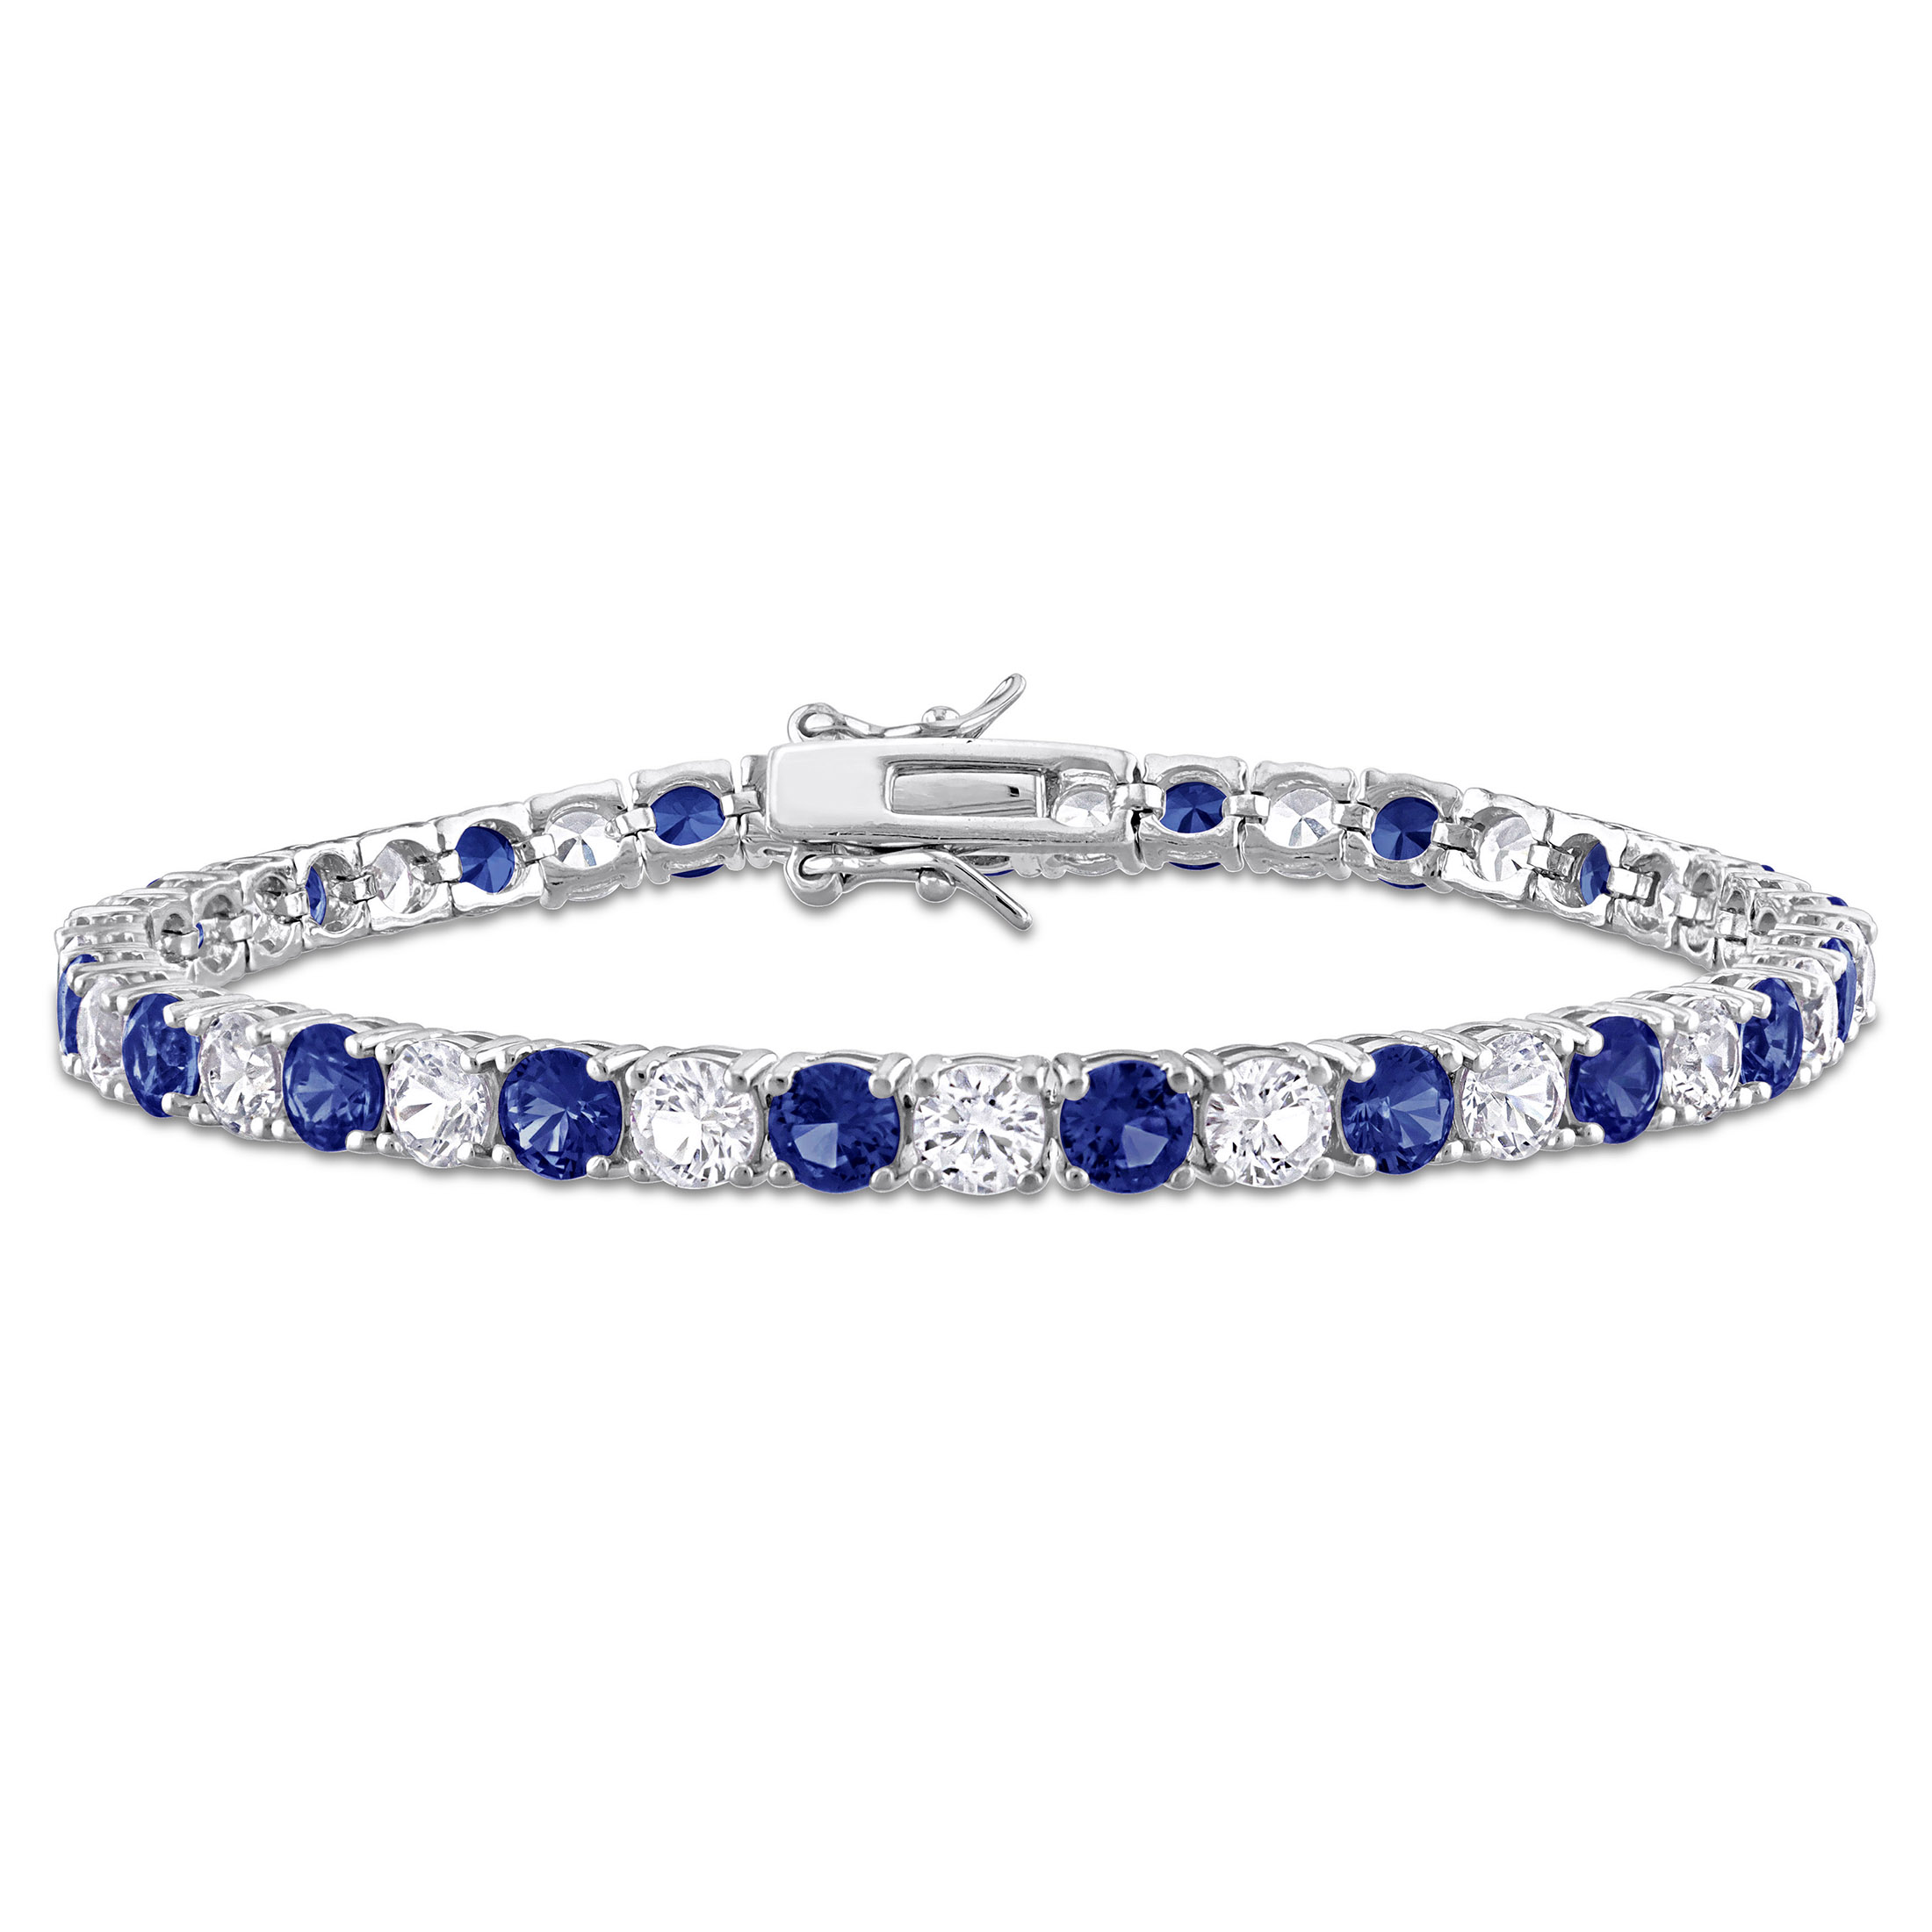 Everly Women's 14-1/4 Carat T.G.W. Created Blue & White Sapphire Sterling Silver Tennis Bracelet - image 3 of 9